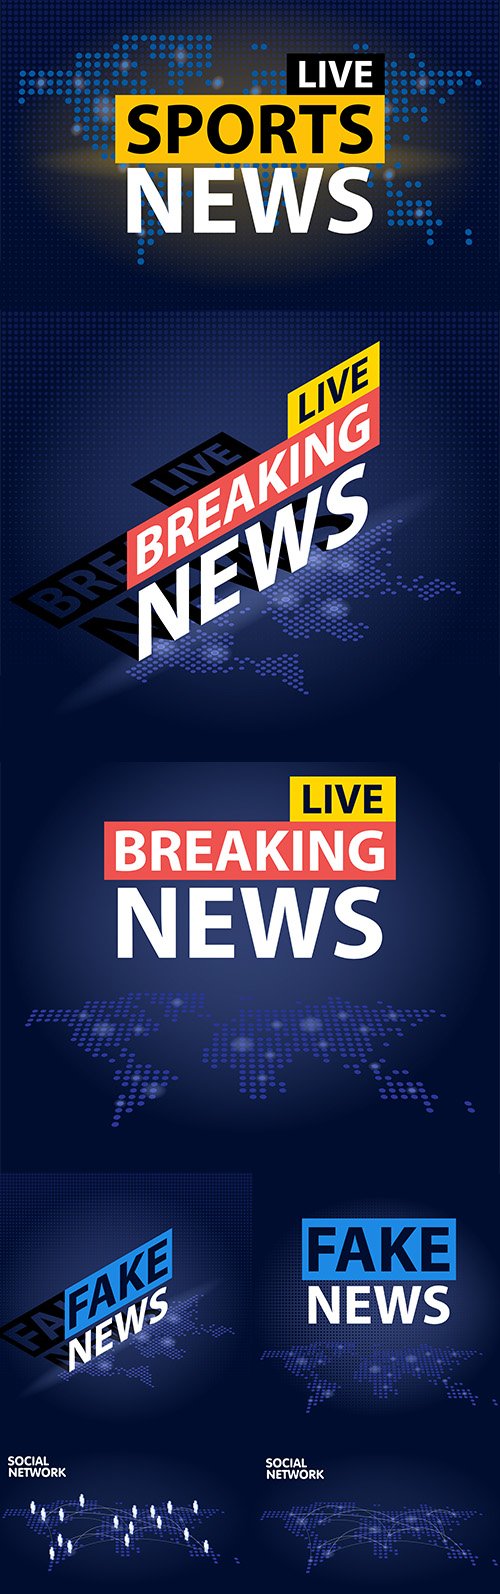 Live Breaking News Background